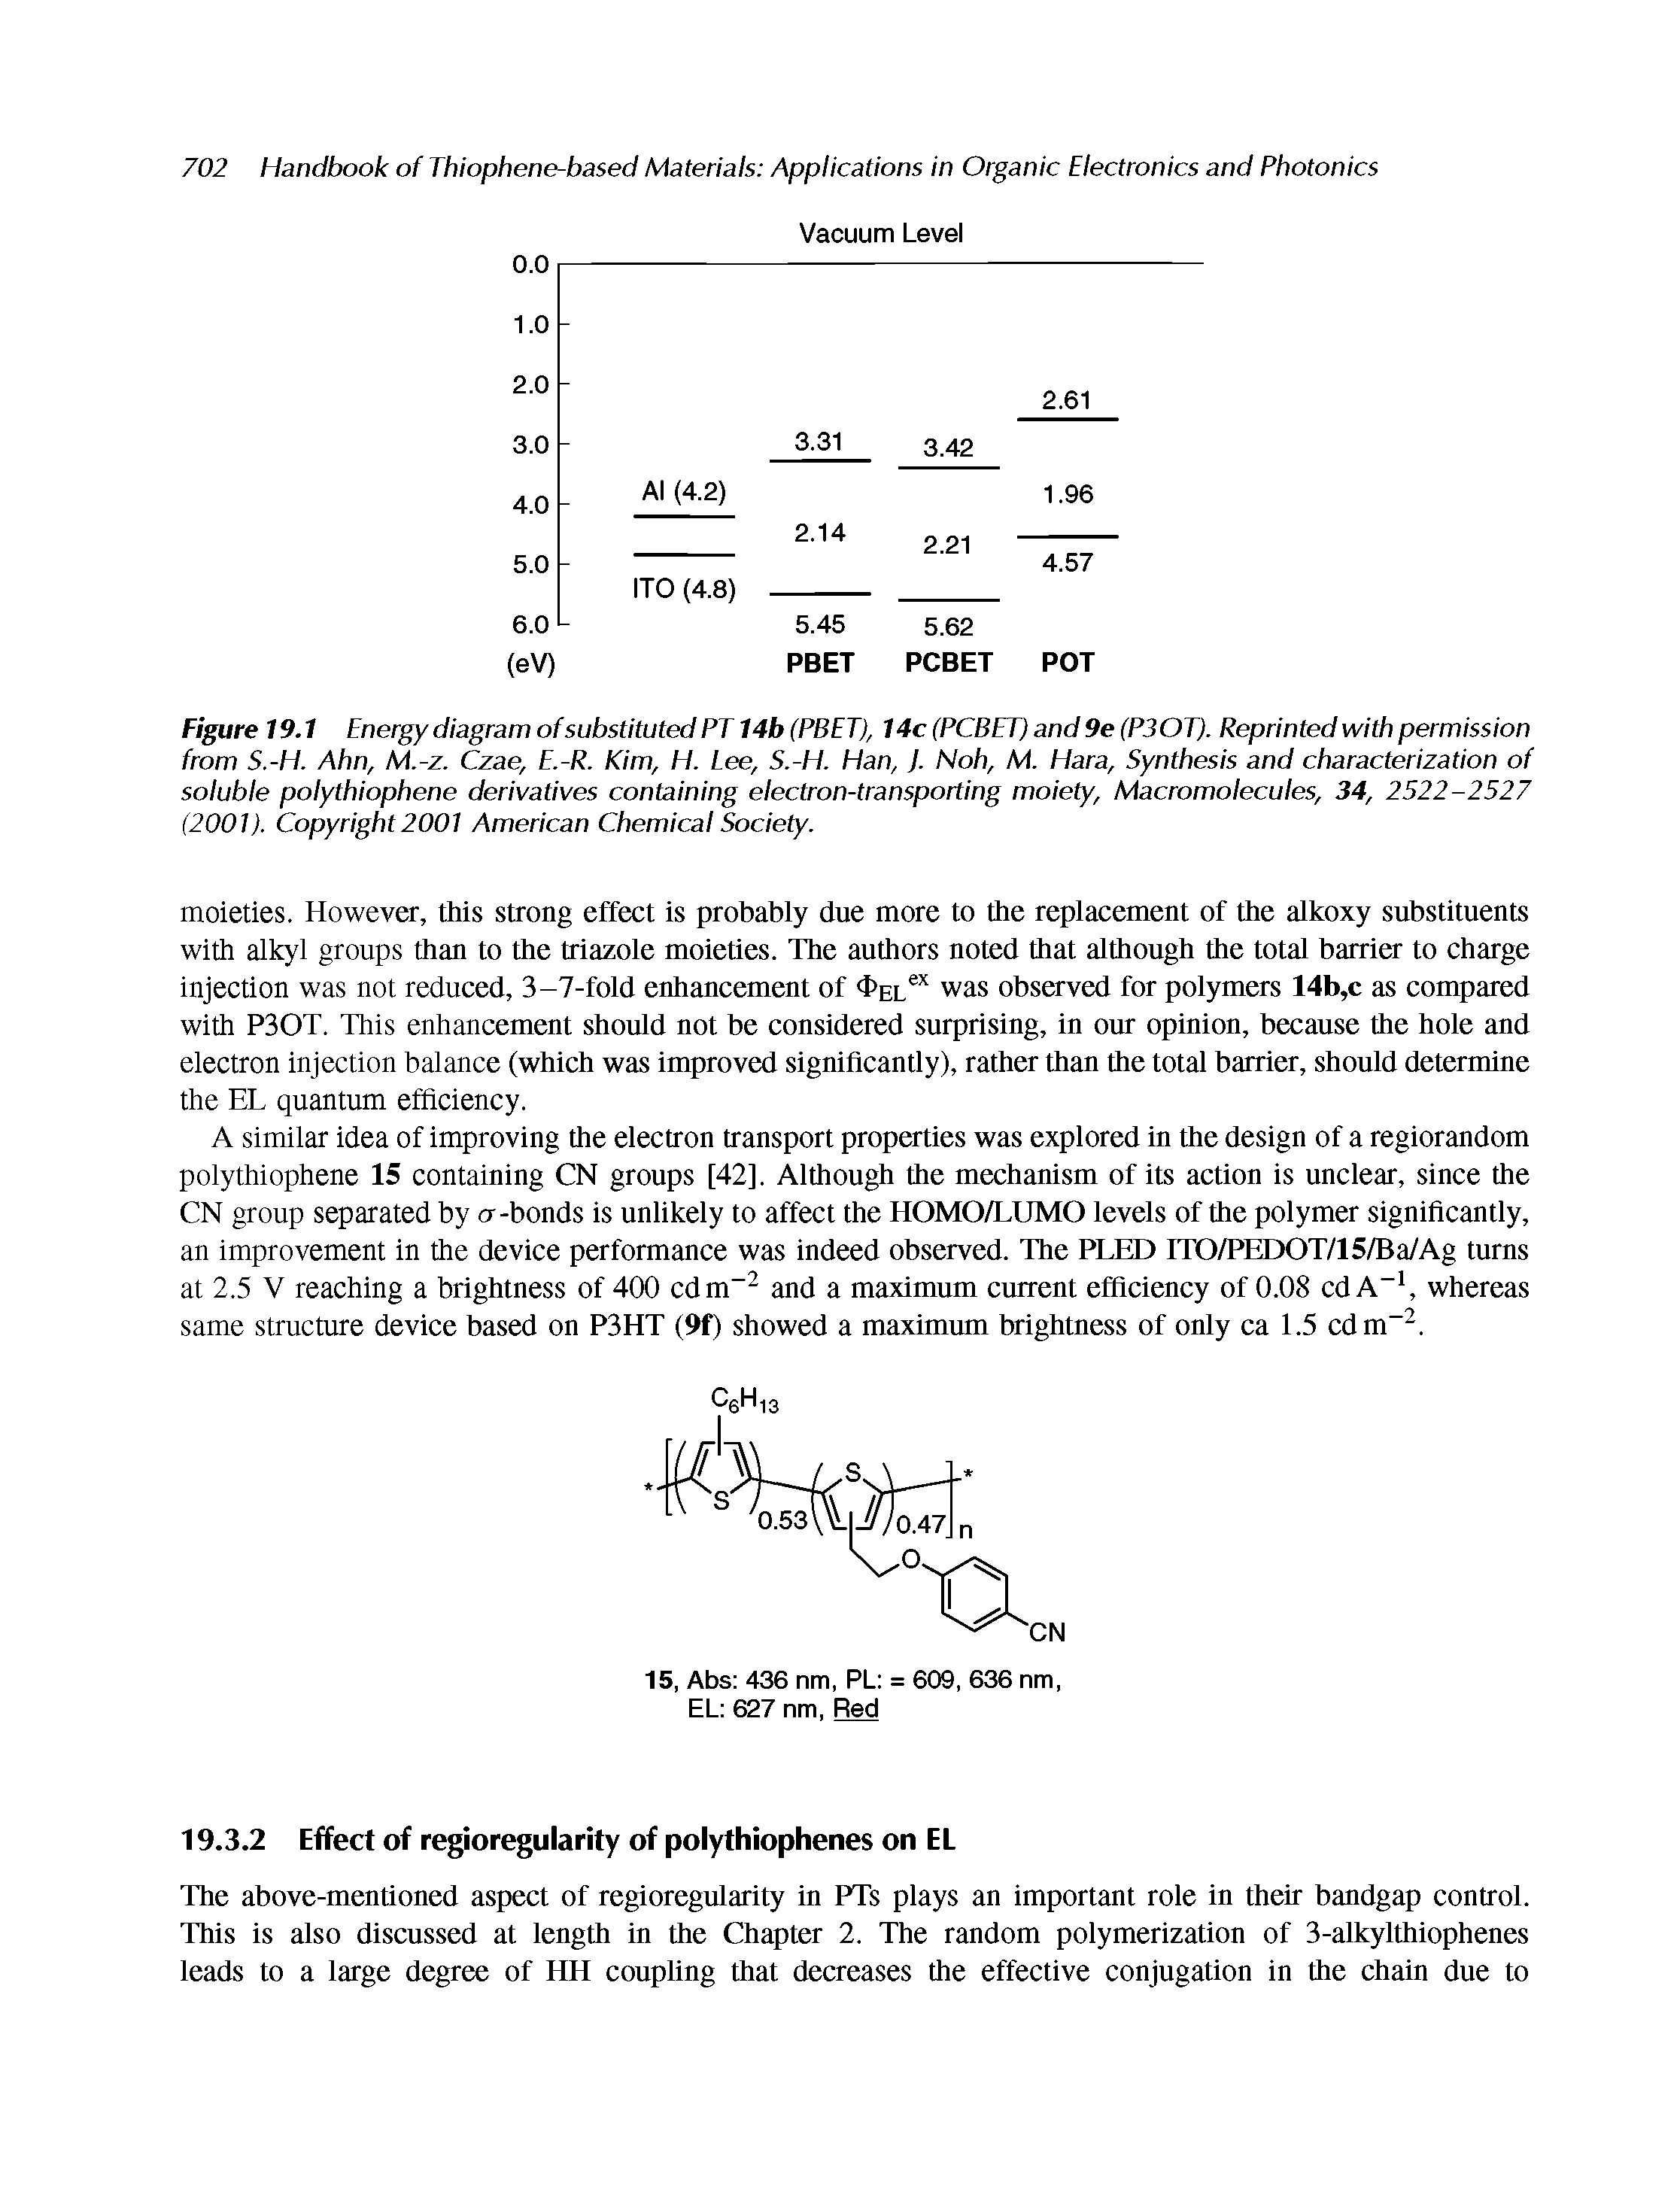 Figure 19.1 Energy diagram of substituted PT 14b(PBET), 14c(PCBET)and9e(P30T). Reprinted with permission from S.-H. Ahn, M.-z. Czae, E.-R. Kim, H. Lee, S.-H. Han, J. Nob, M. Hara, Synthesis and characterization of soluble polythiophene derivatives containing electron-transporting moiety. Macromolecules, 34, 2522-2527 (2001). Copyright 2001 American Chemical Society.